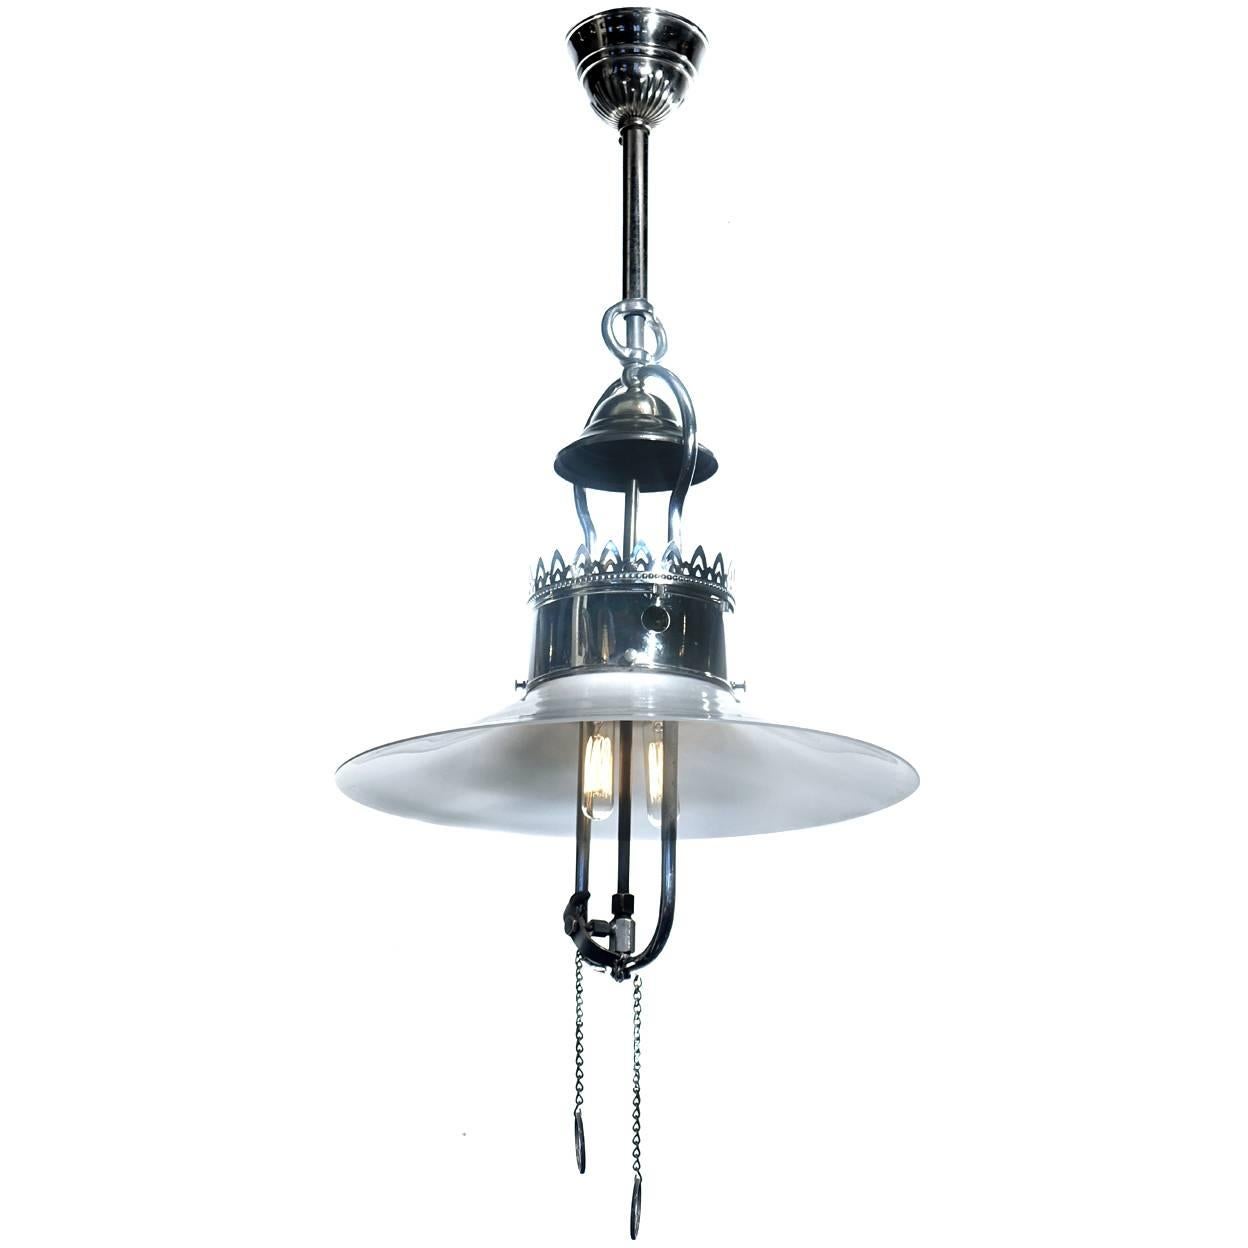 Simple and Elegant Converted Gas Lamp, Nickel-Plated